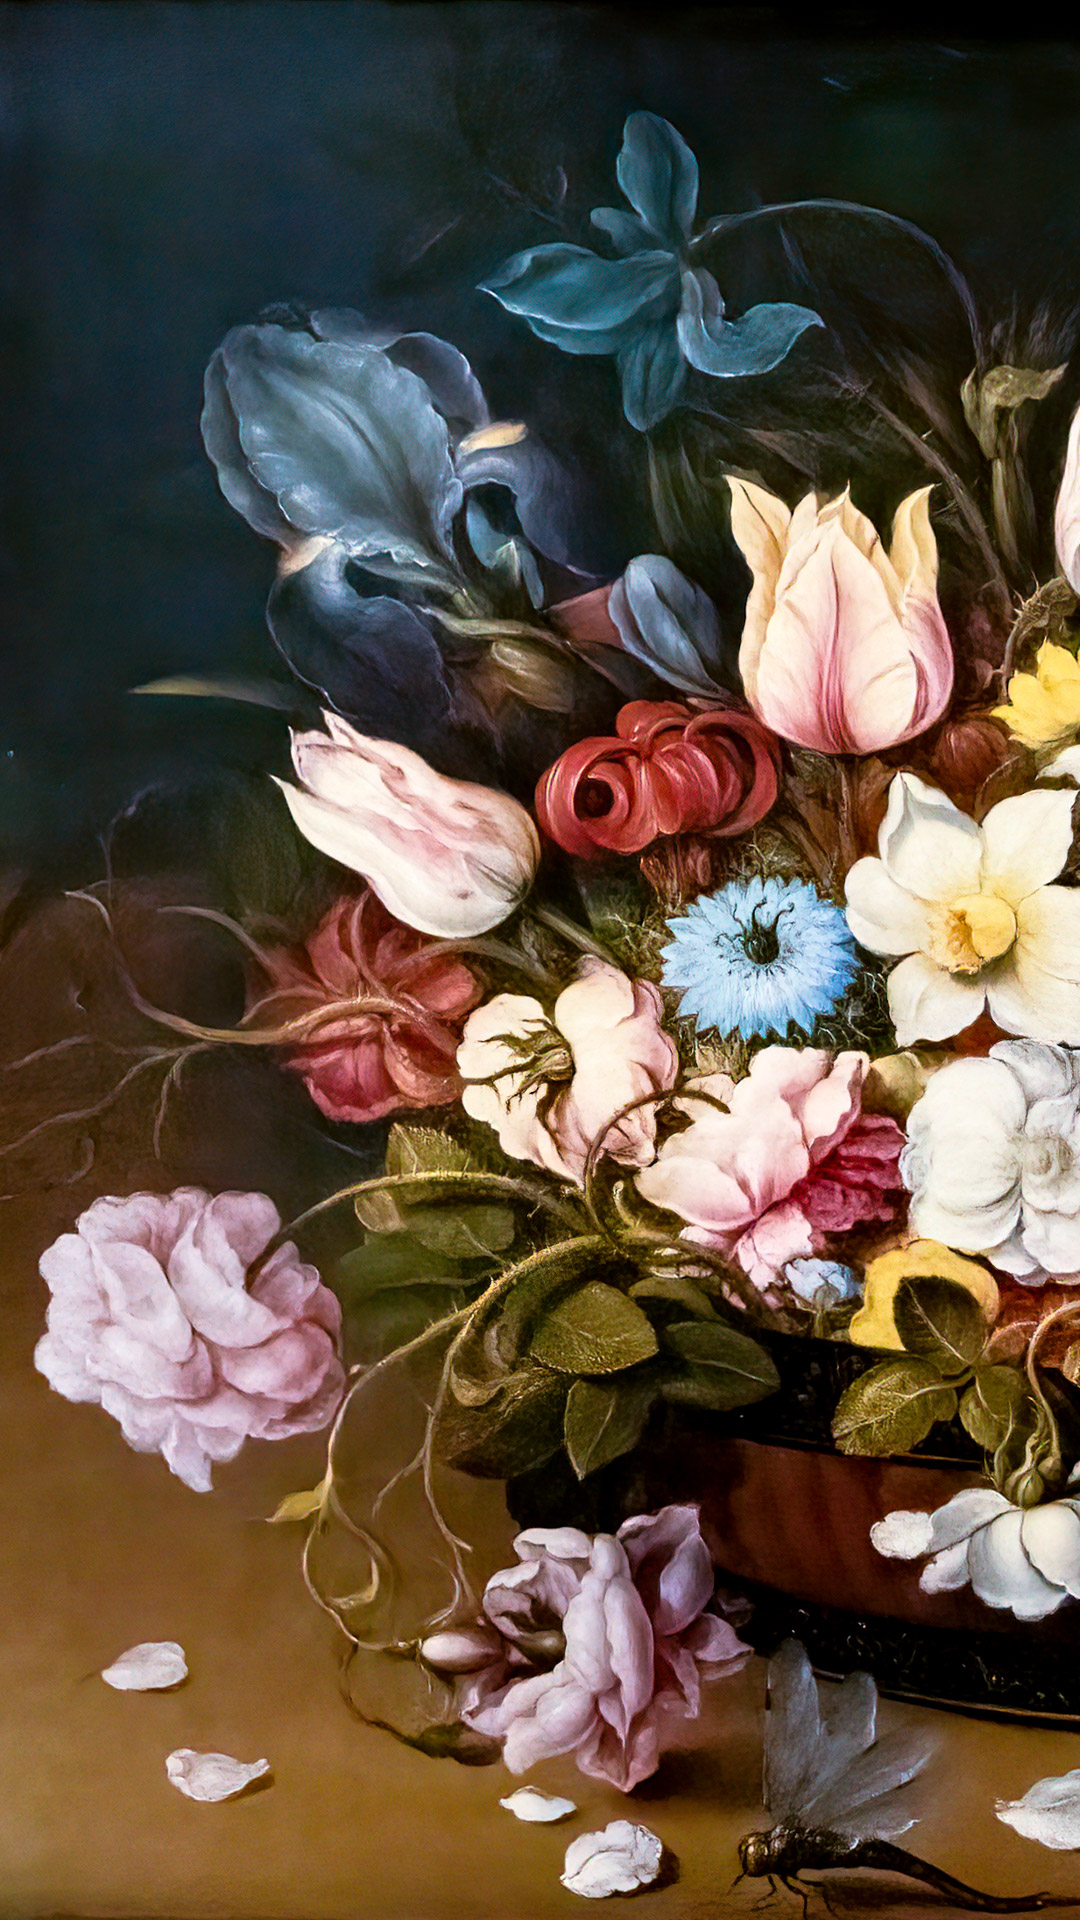 Enjoy the richness and variety of still life art with Osias Beert wallpaper, presenting his exquisite arrangements of flowers, fruits, and other objects.